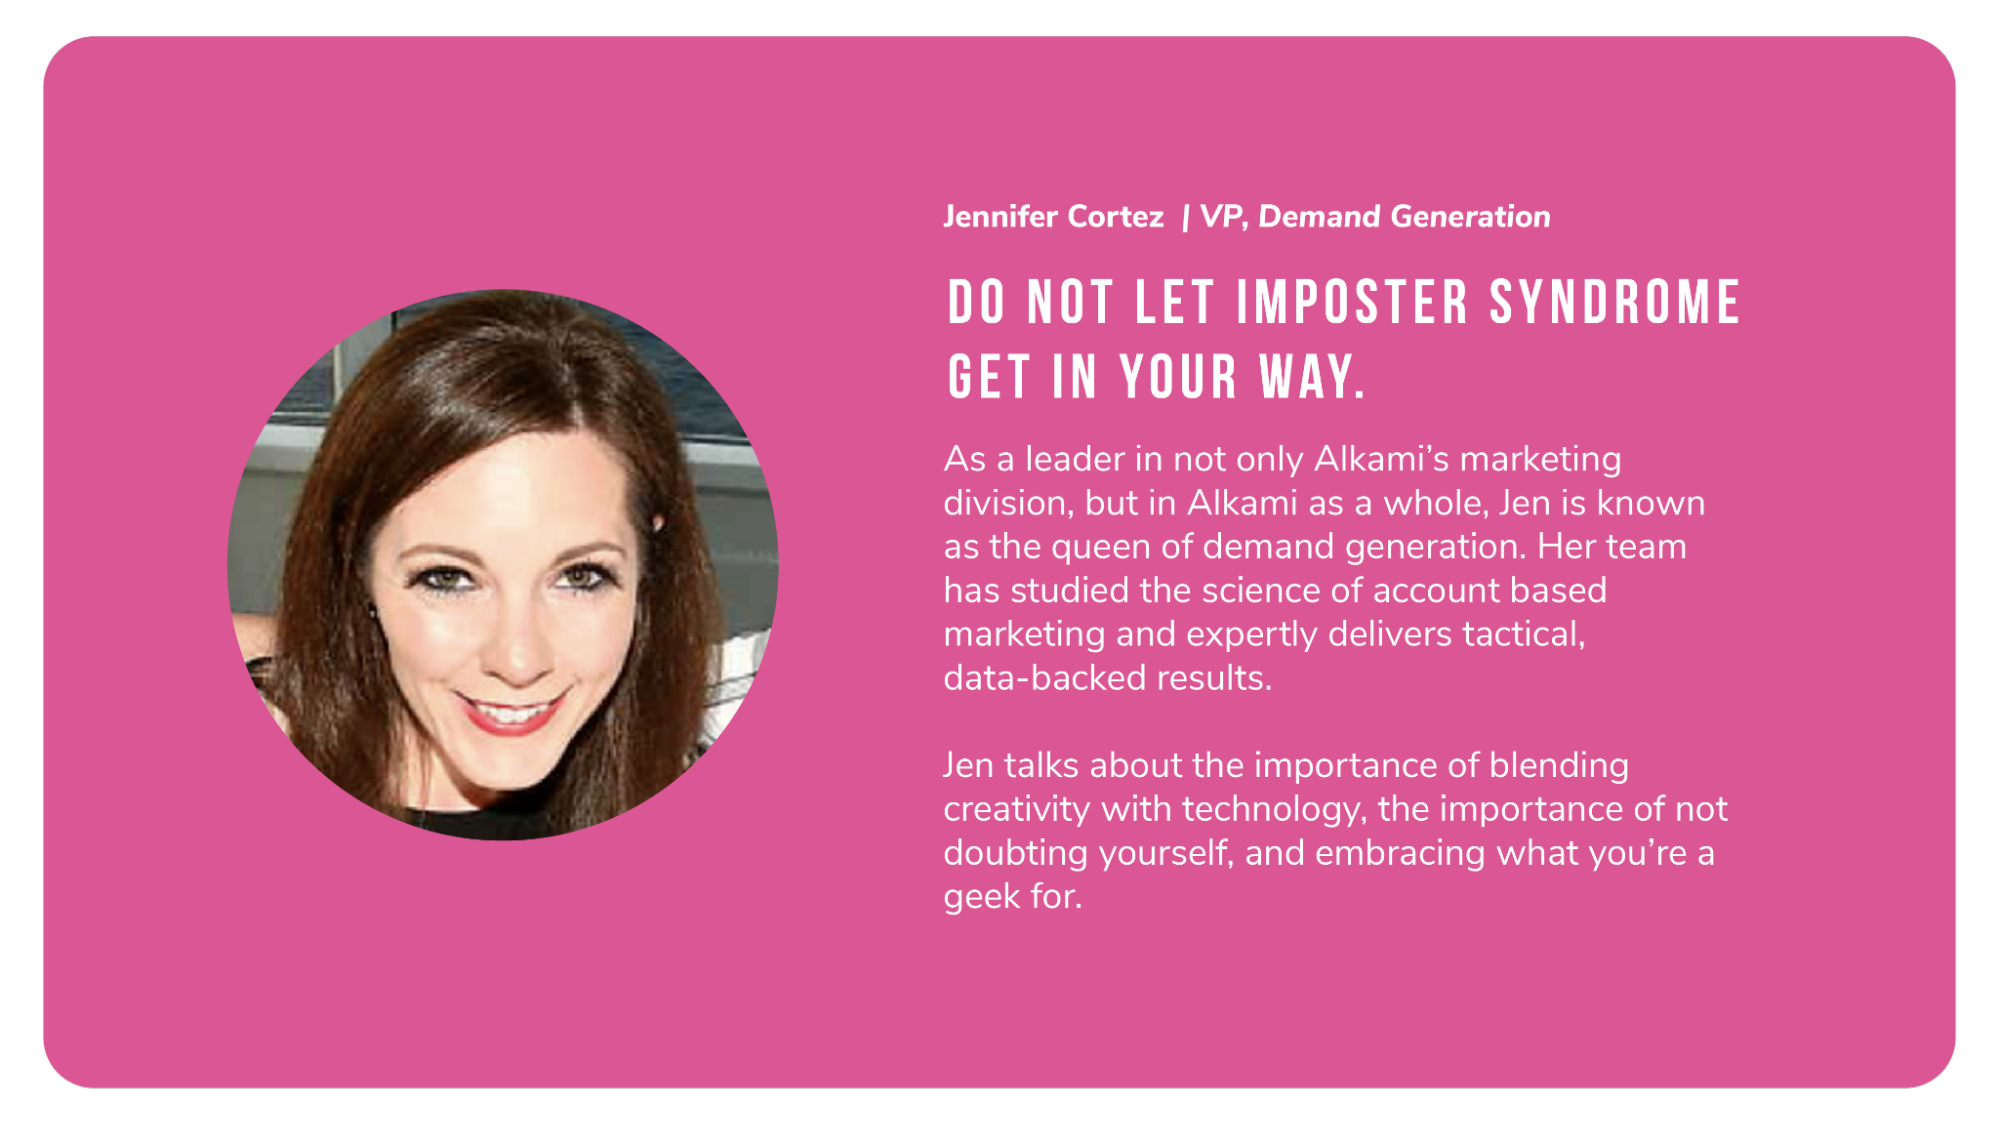 Jennifer Cortez of Alkami says: Do not let imposter syndrome get in your way